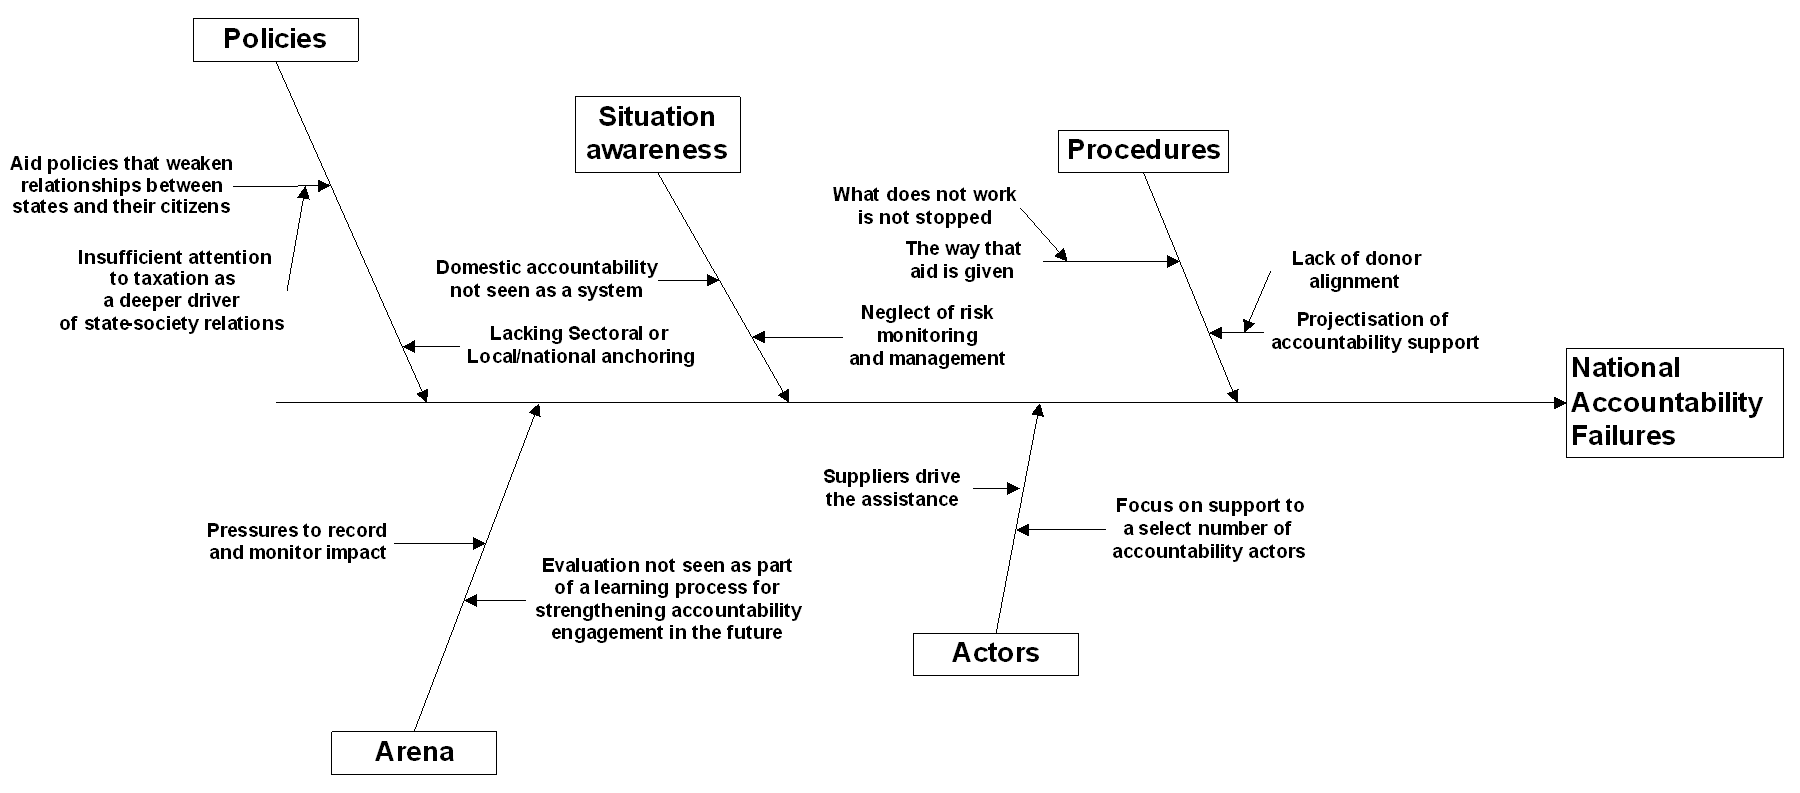 Figure 5: Cause-effect Pattern with possible aid-based causes of national accountability failures.